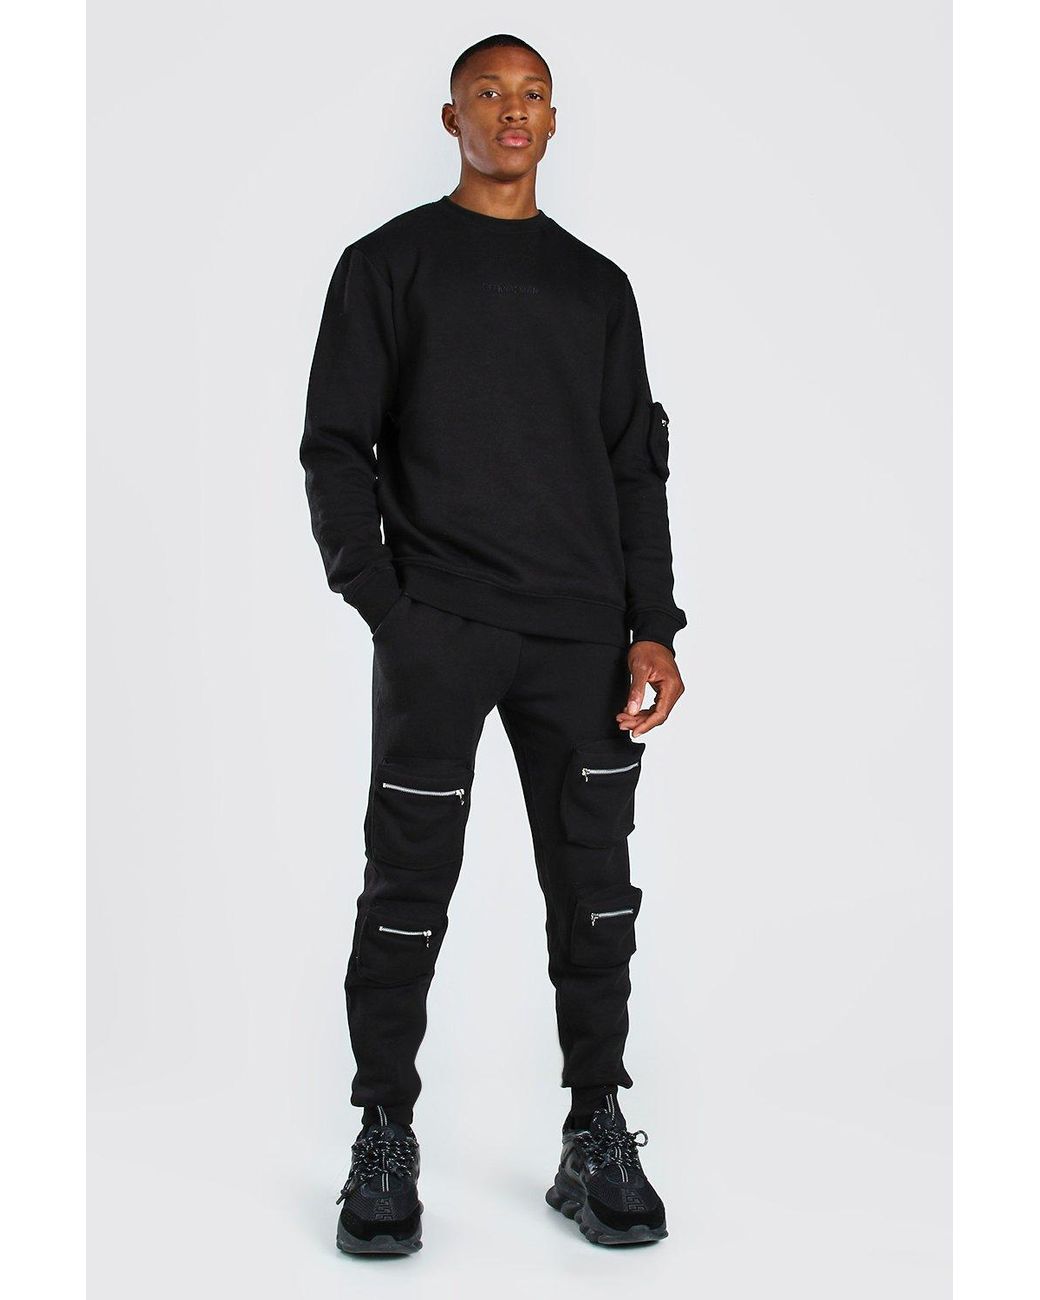 BoohooMAN Official 3d Utility Pocket Sweater Tracksuit in Black for Men ...